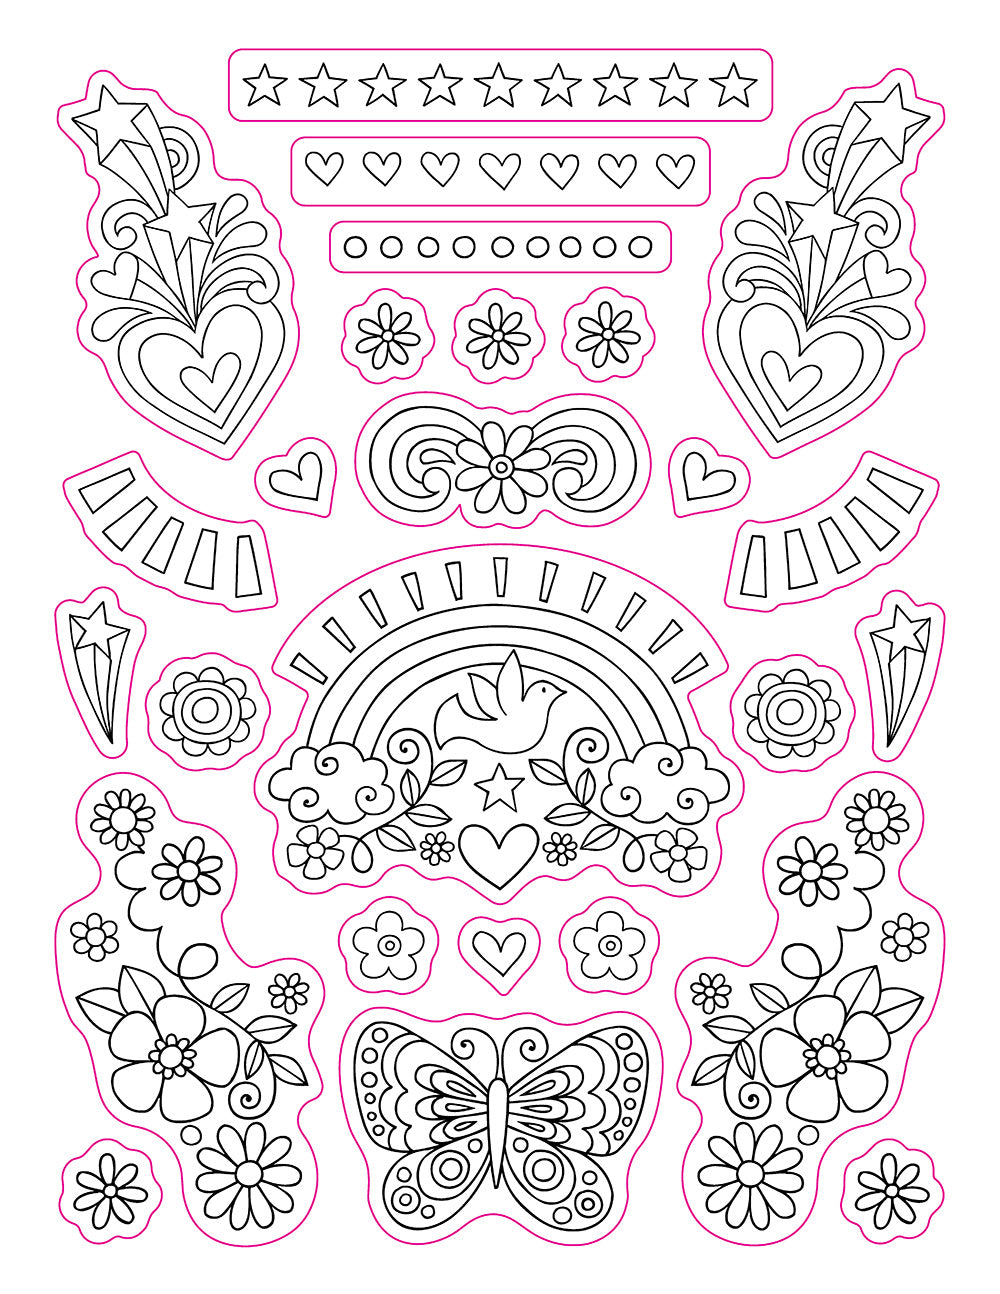 Color Your Own Stickers Party